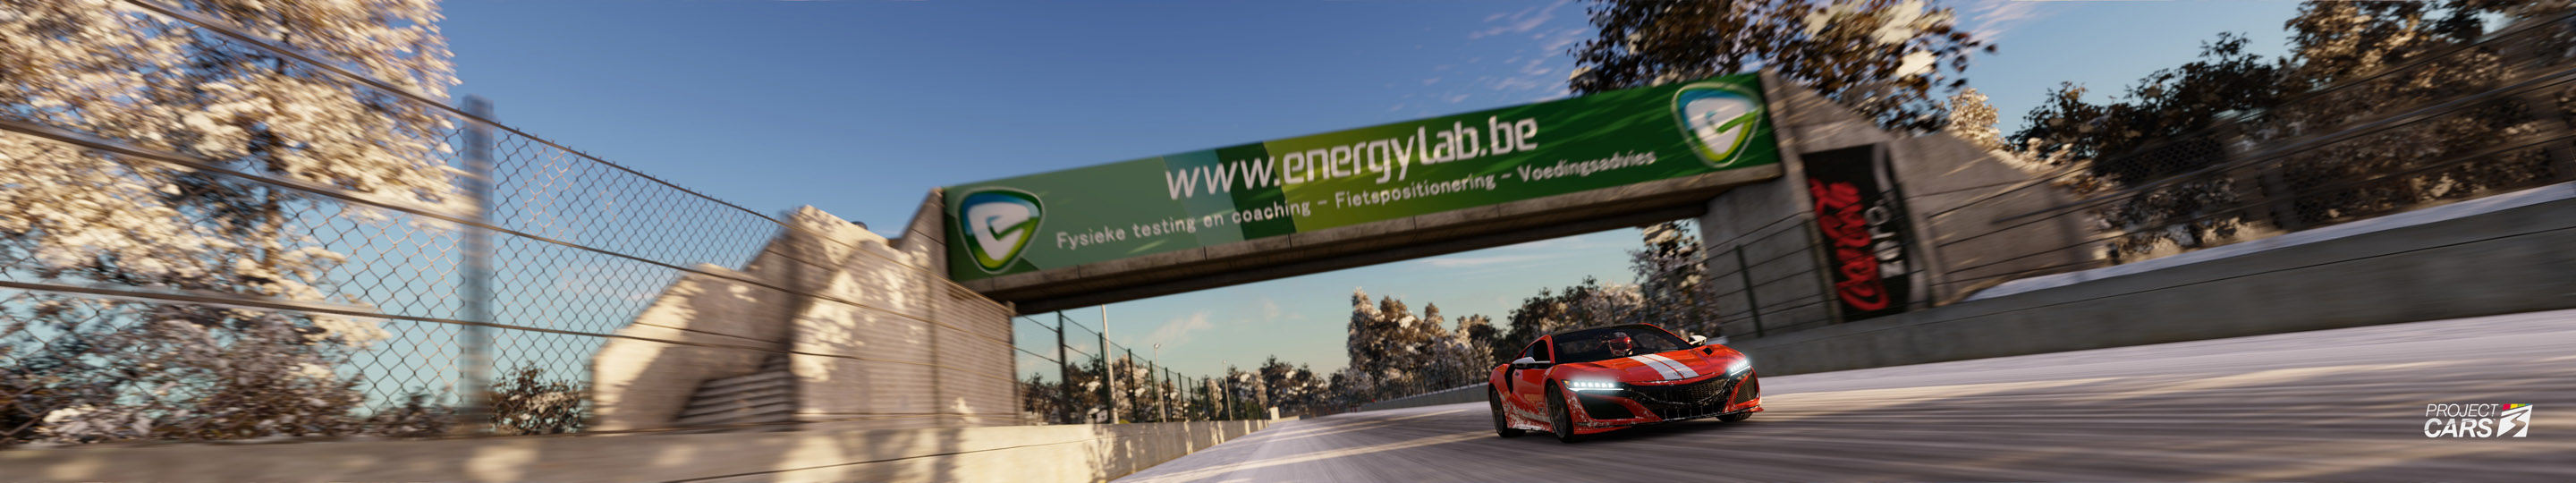 3 PROJECT CARS 3 ACURA NSX 2020 at ZOLDER Snow copy.jpg